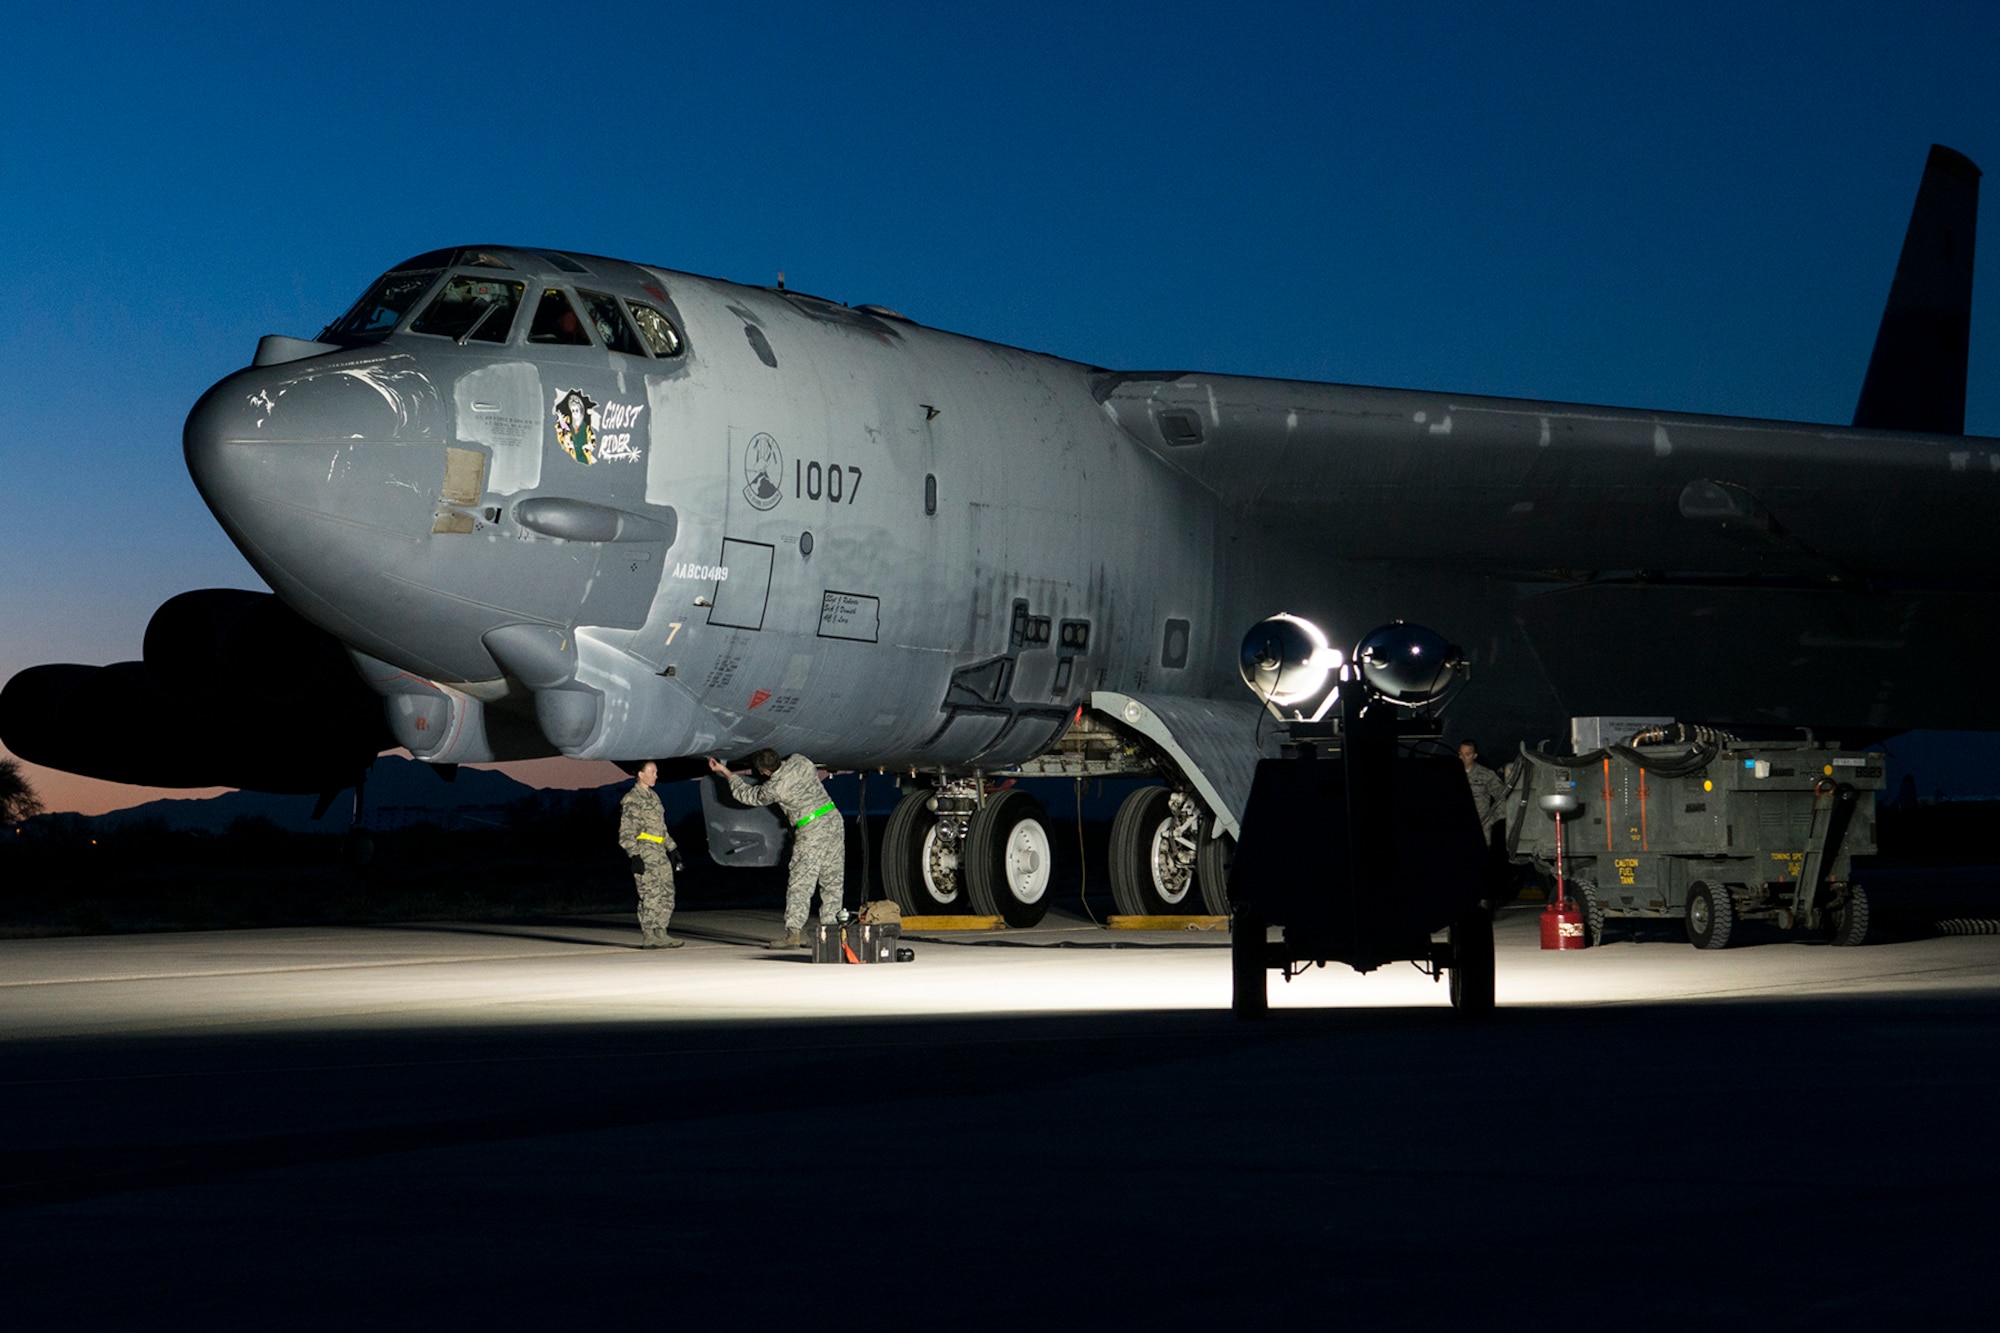 The "Ghost Rider" is prepared for an early morning taxi test on Feb. 12, 2015, Davis-Monthan Air Force Base, Ariz. The B-52H Stratofortress was decommissioned in 2008 and has been sitting in the 309th Aerospace Maintenance and Regeneration Group's "Boneyard", but is being restored to join the active fleet of B-52s. (U.S. Air Force photo by Master Sgt. Greg Steele/Released)